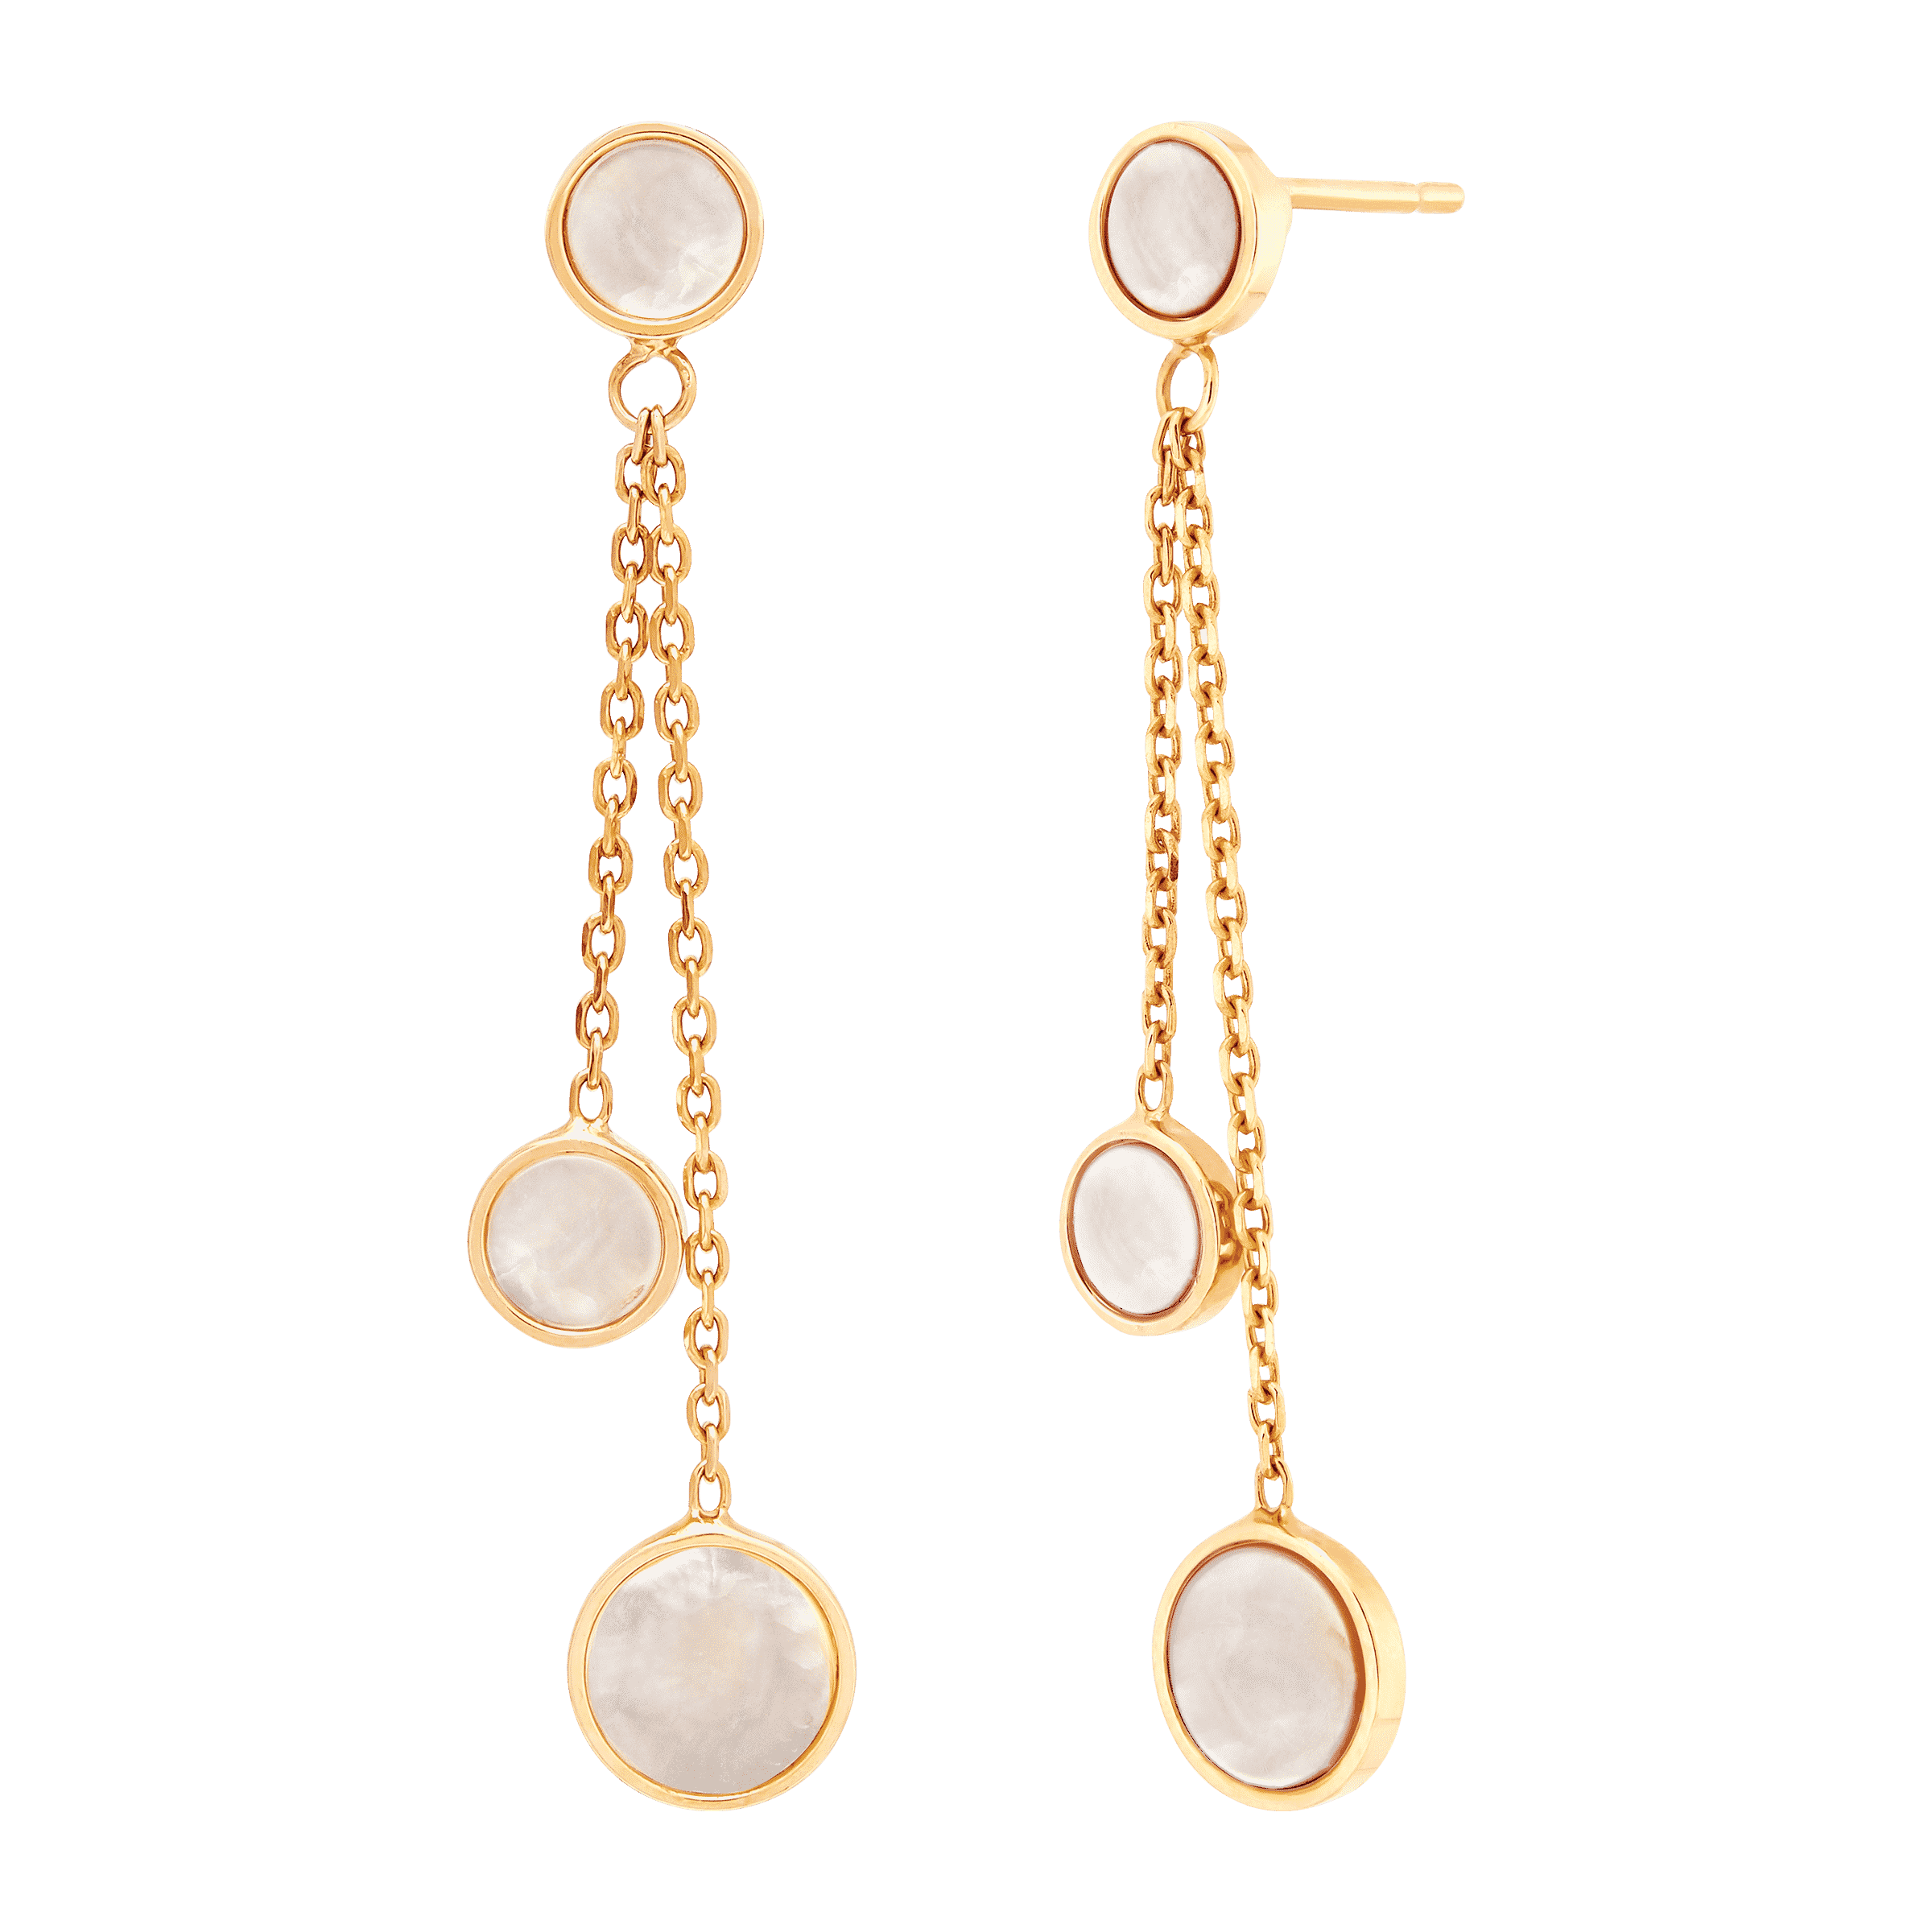 Welry White Mother-of-Pearl Lariat Drop Earrings in 14K Yellow